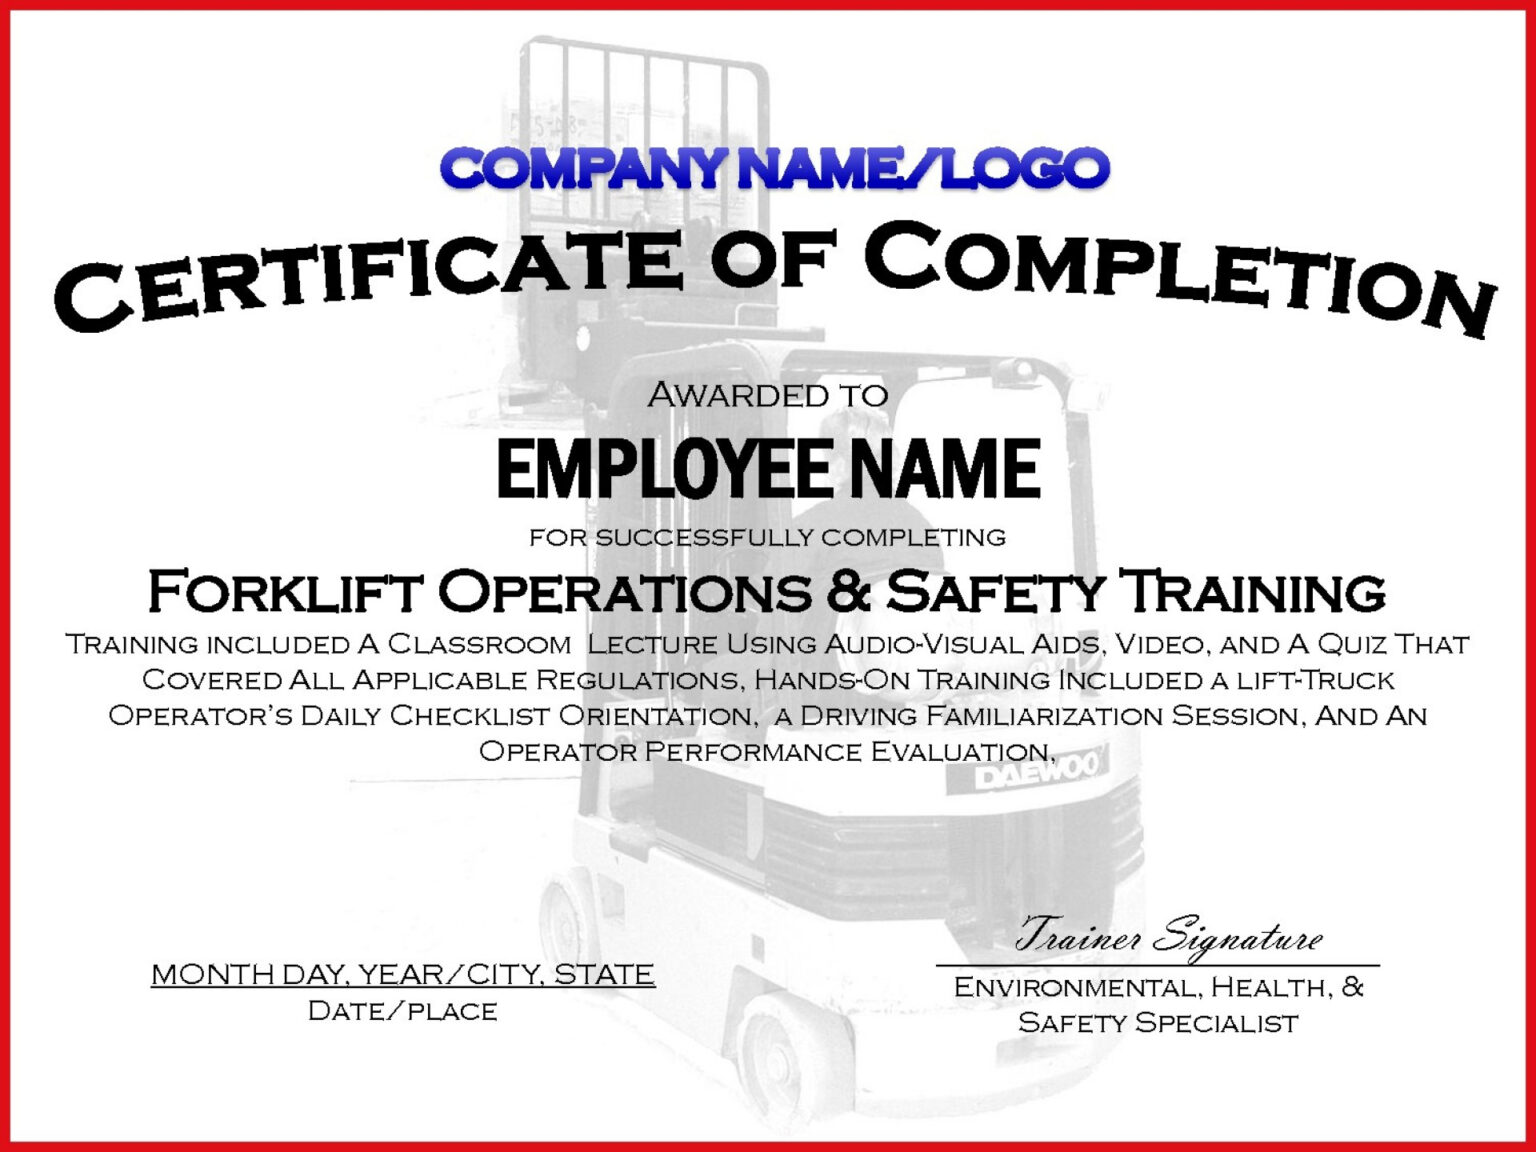 002-forklift-truck-training-certificate-template-free-osha-pertaining-to-forklift-certification